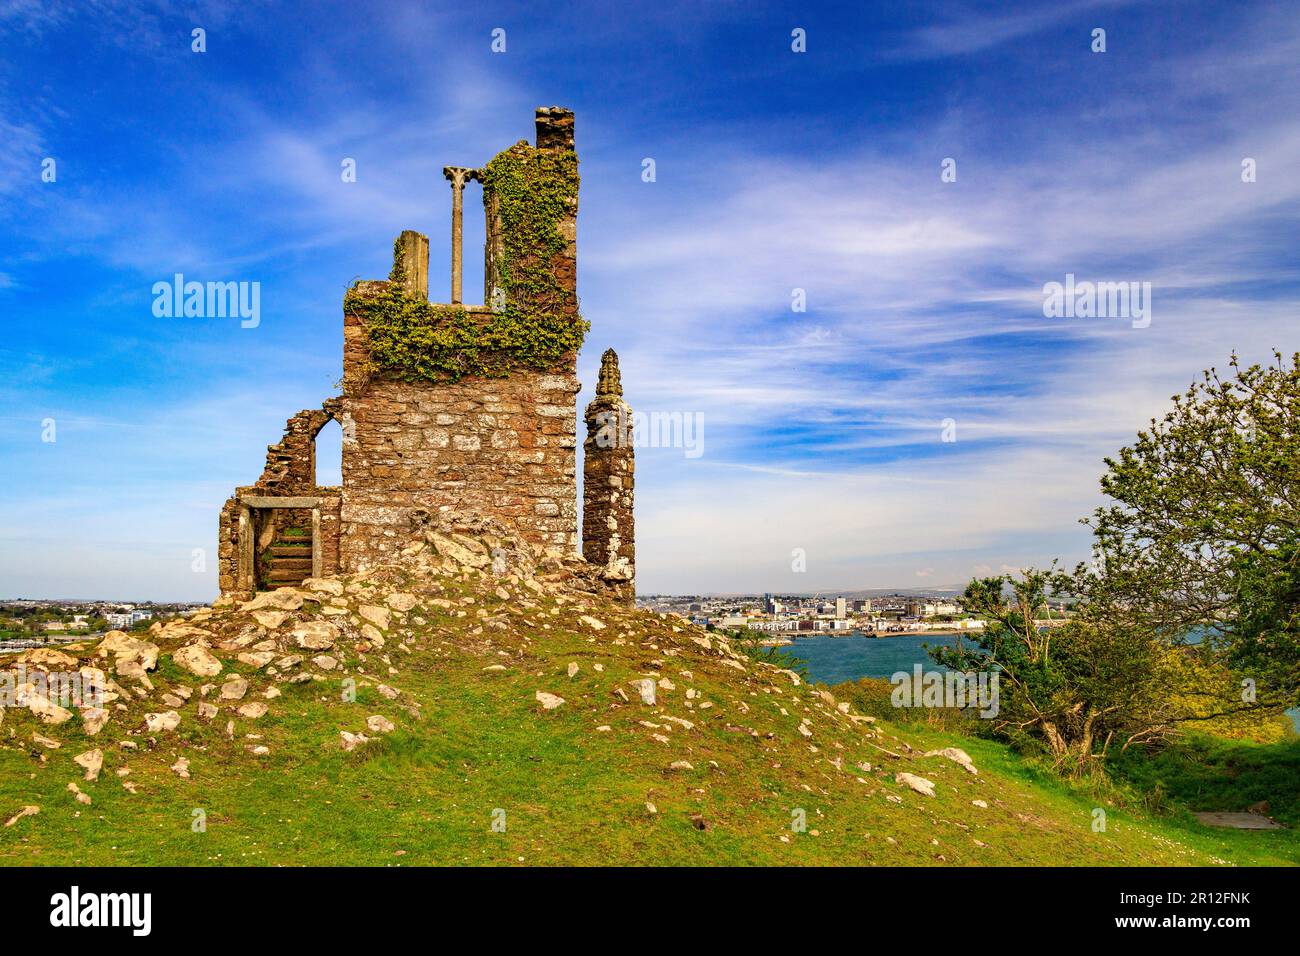 The ruined Folly in Mount Edgcumbe Country Park has views across Plymouth Sound towards The Hoe and waterfront, Cornwall, England, UK Stock Photo